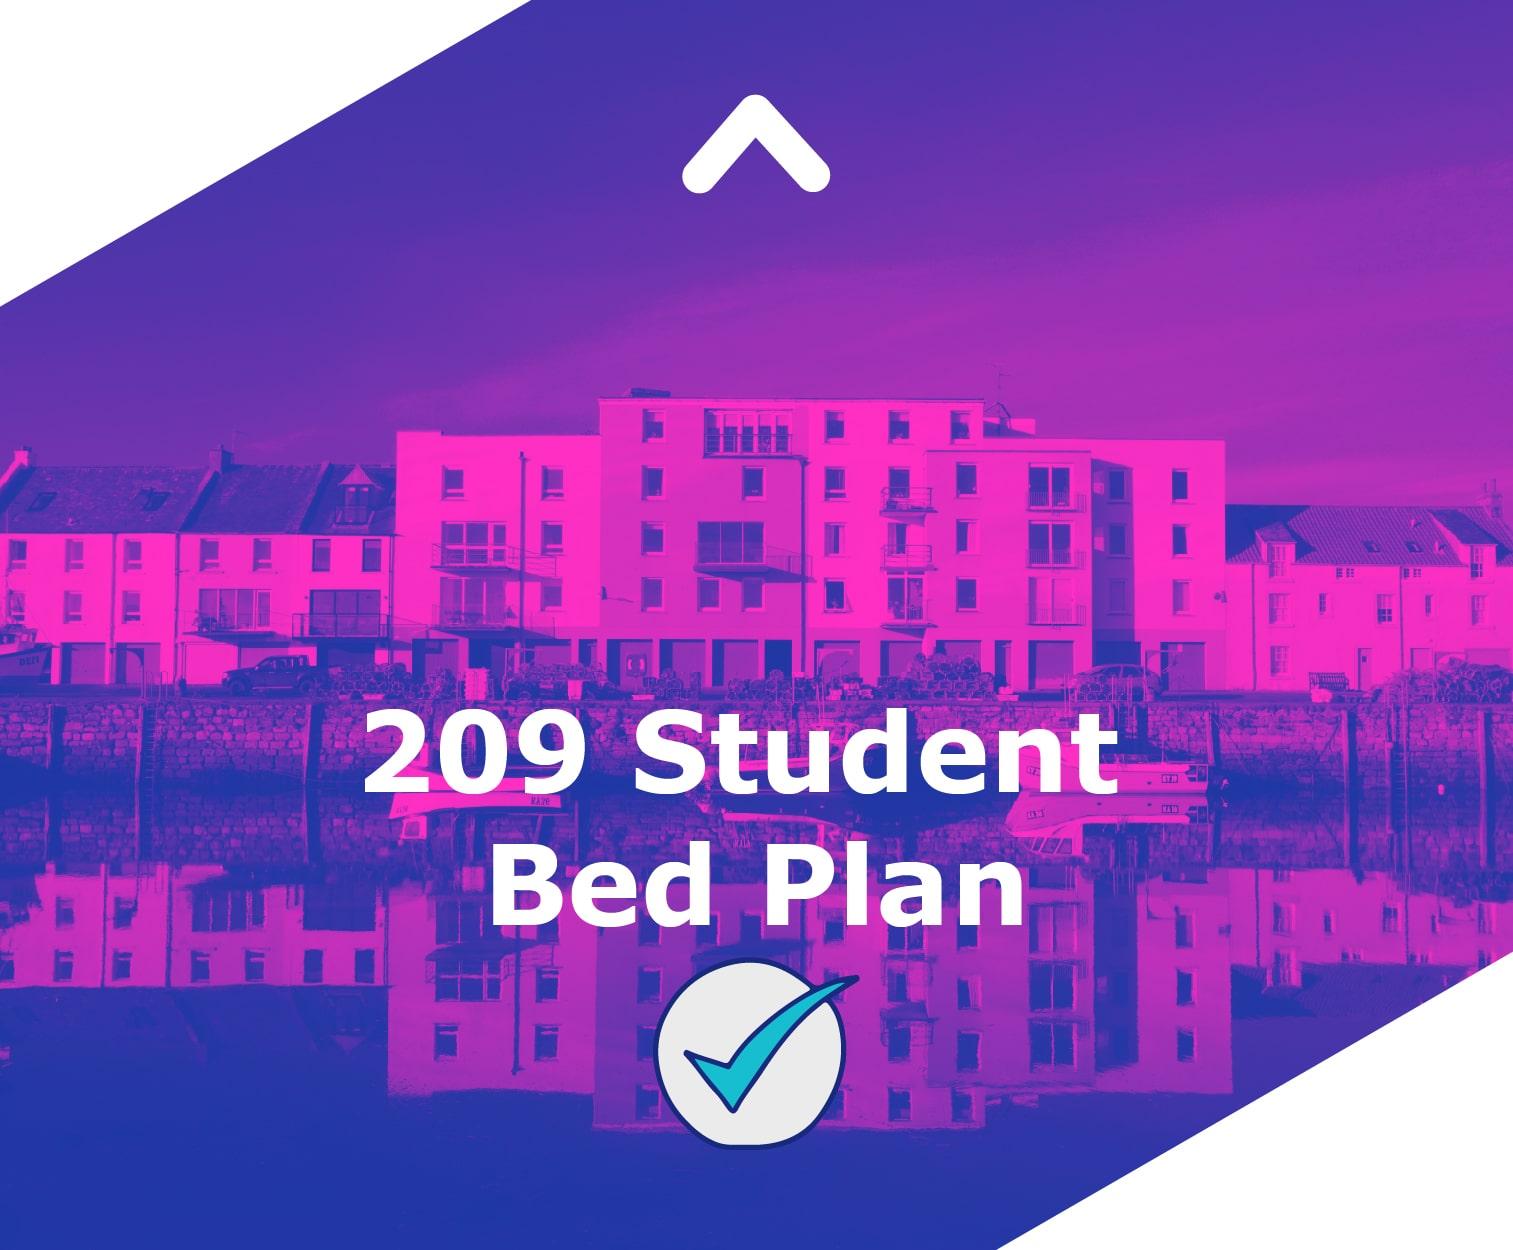 209 student bed plan approved near St Andrews